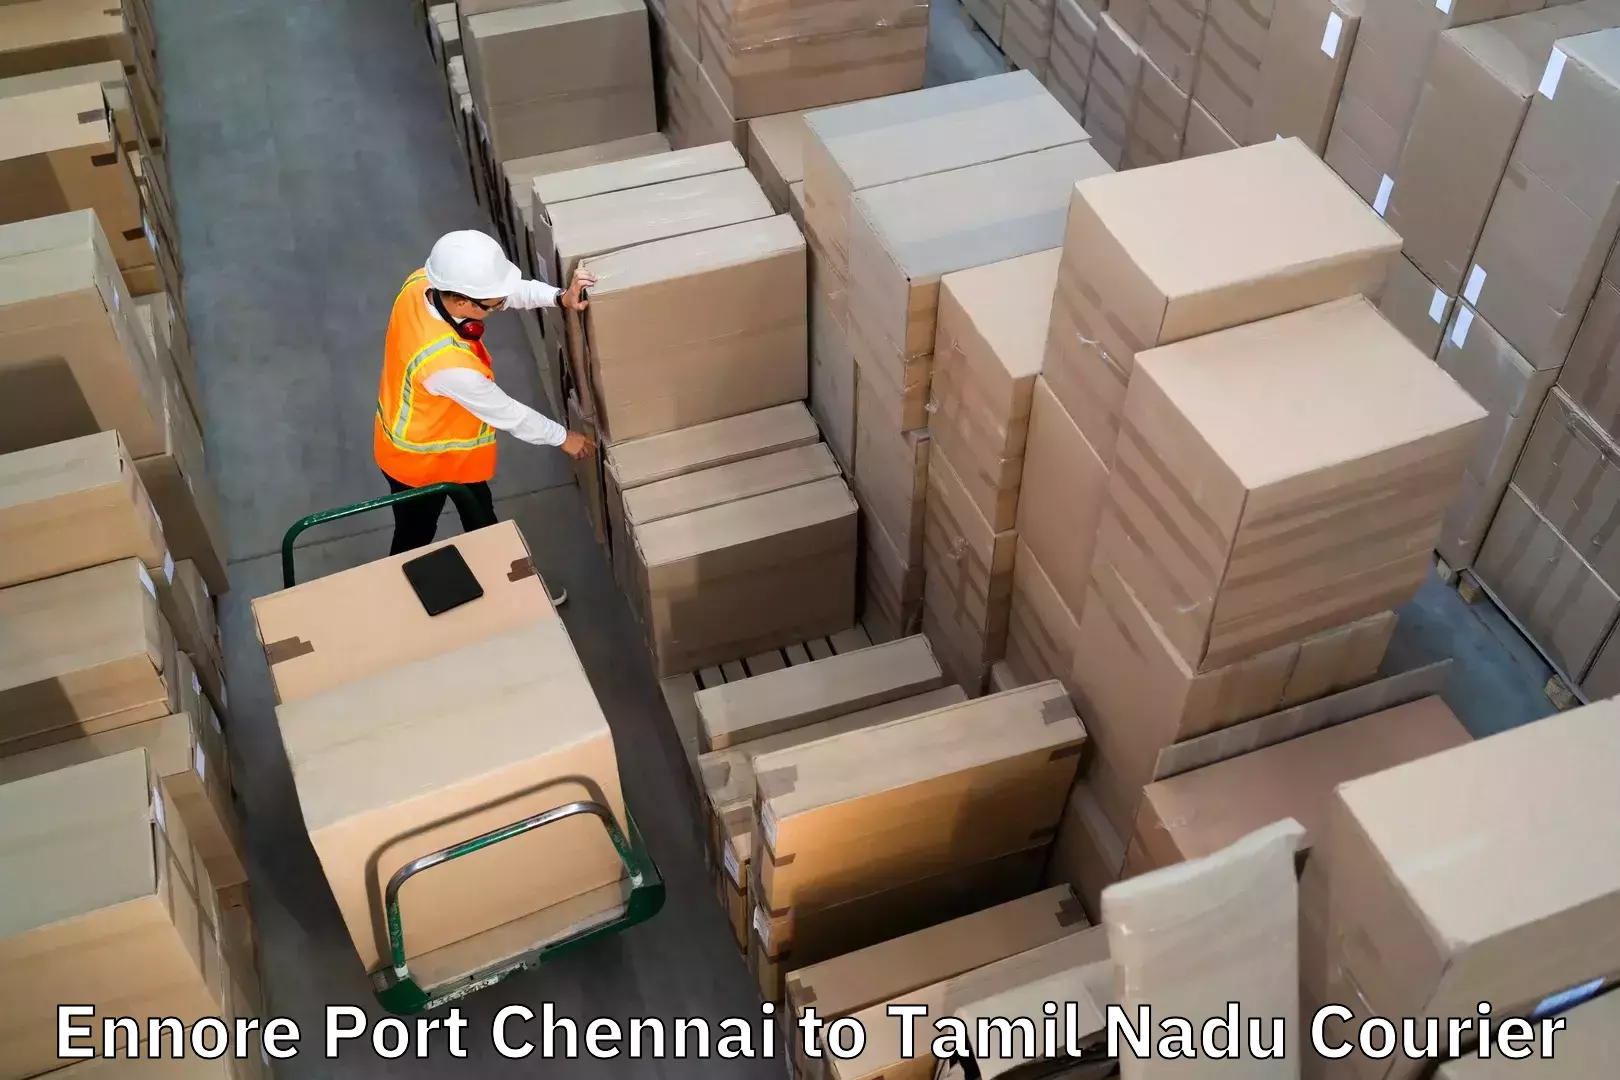 Baggage shipping rates calculator Ennore Port Chennai to Ennore Port Chennai